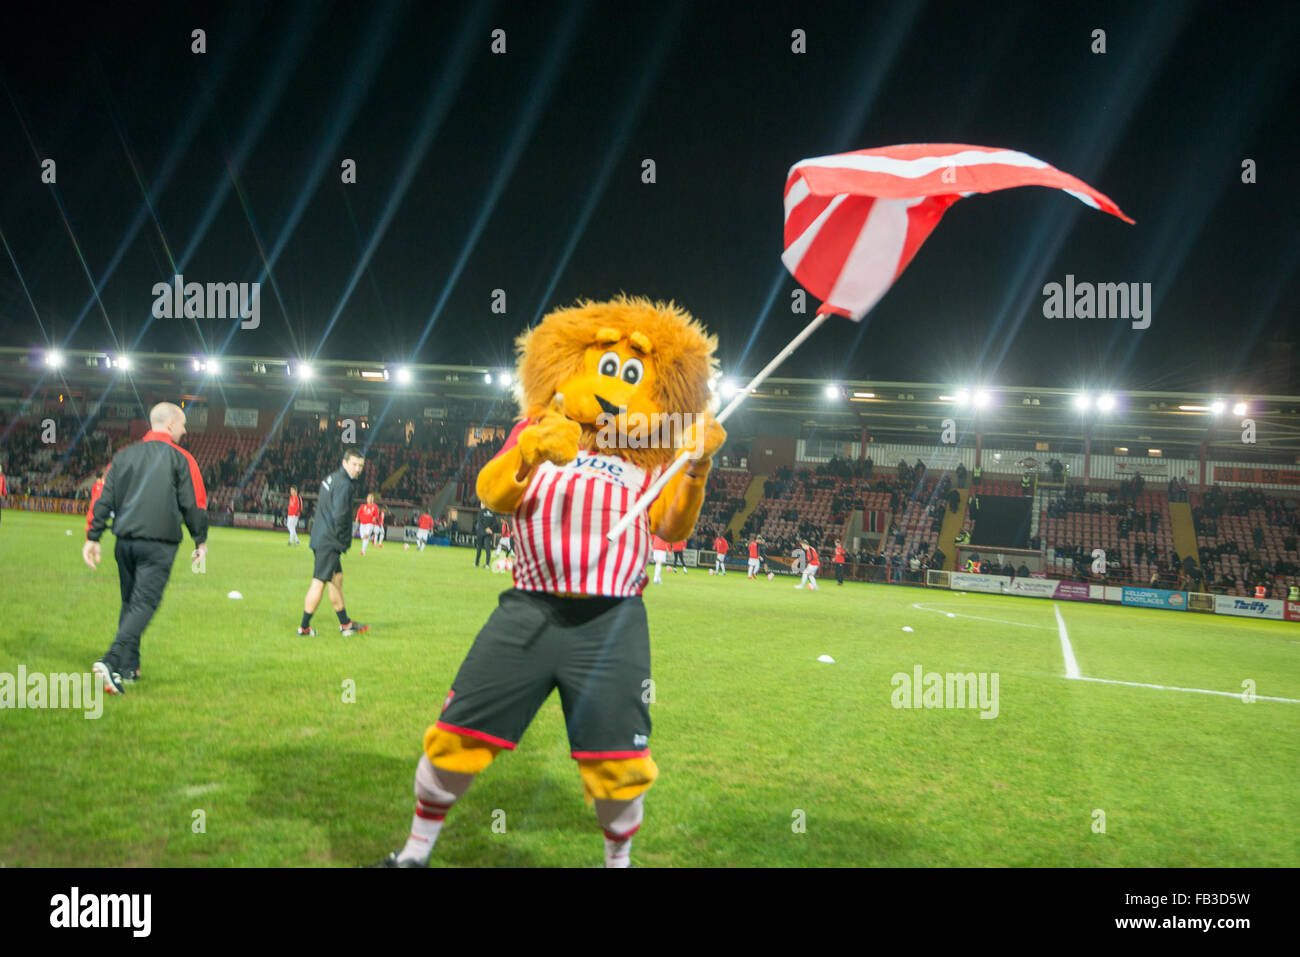 Exeter, Devon, UK. 8th January, 2016. Exeter City Vs Liverpool FC, Exeter, Devon, Uk Friday 8th January 2016, Exeter Mascot Grecian the Lion, Credit:  @camerafirm/Alamy Live News Stock Photo